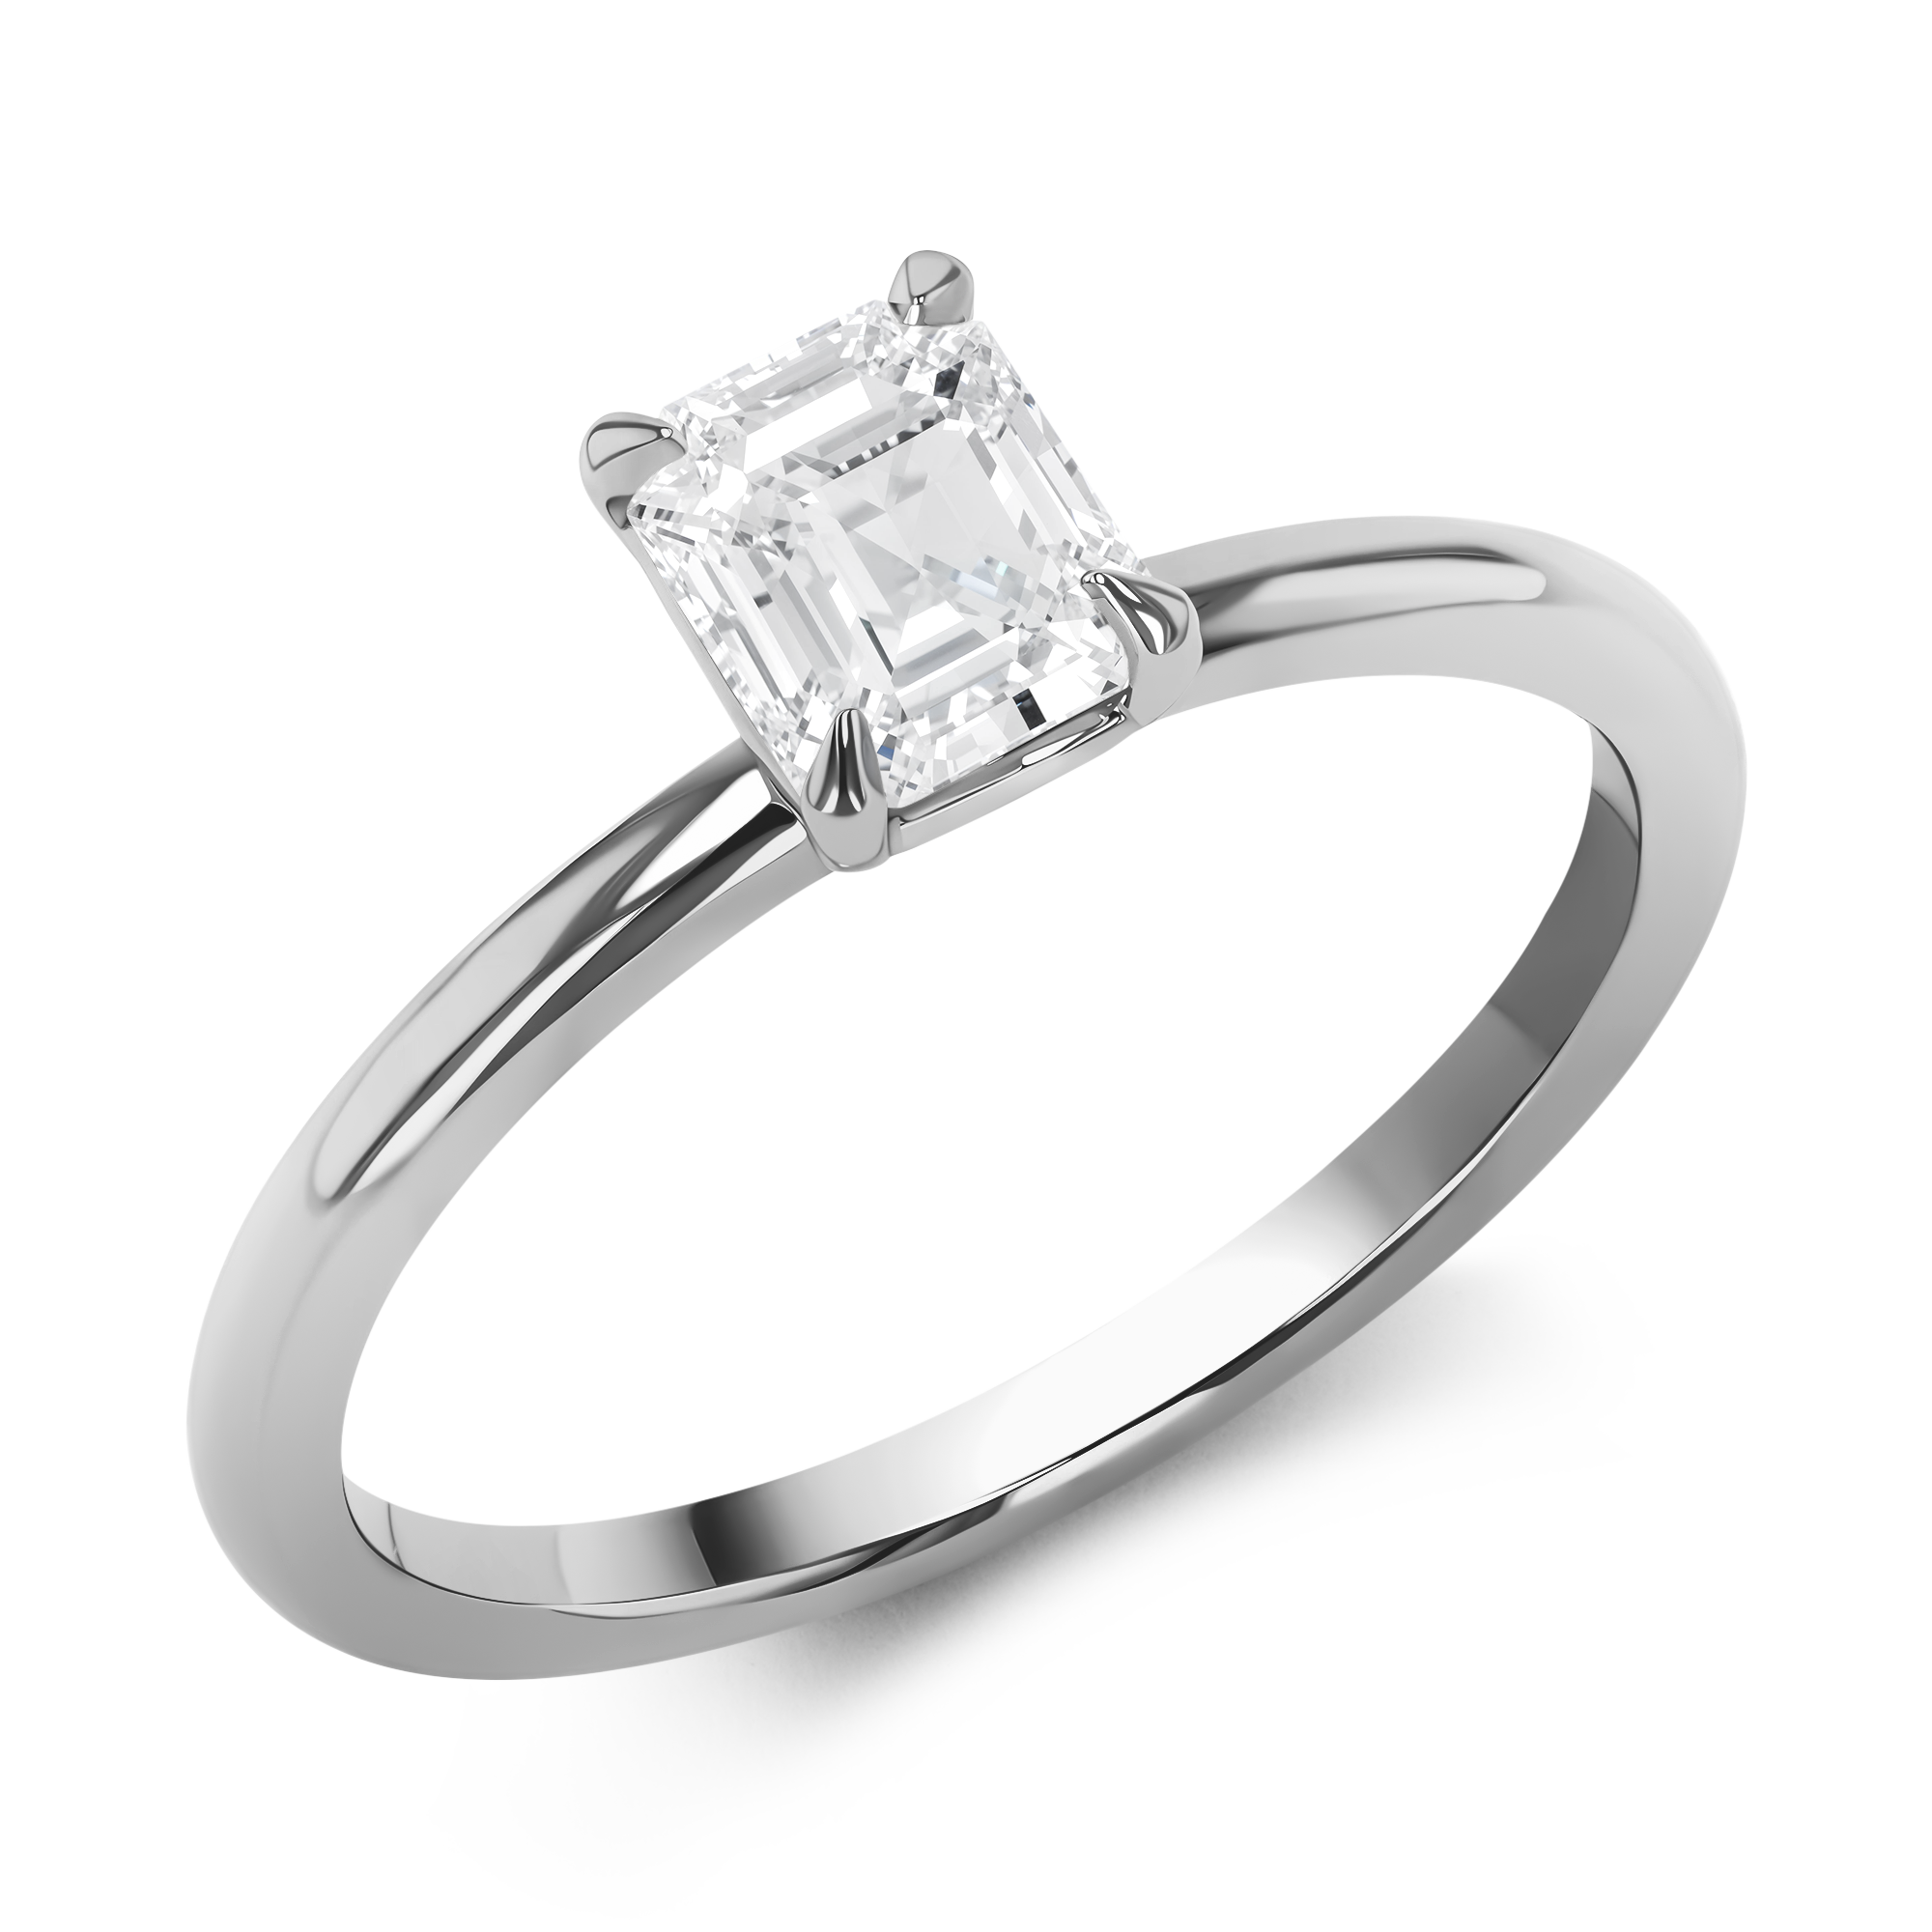 Contemporary 0.93ct Diamond Solitaire Ring Emerald Cut, Claw Set_1